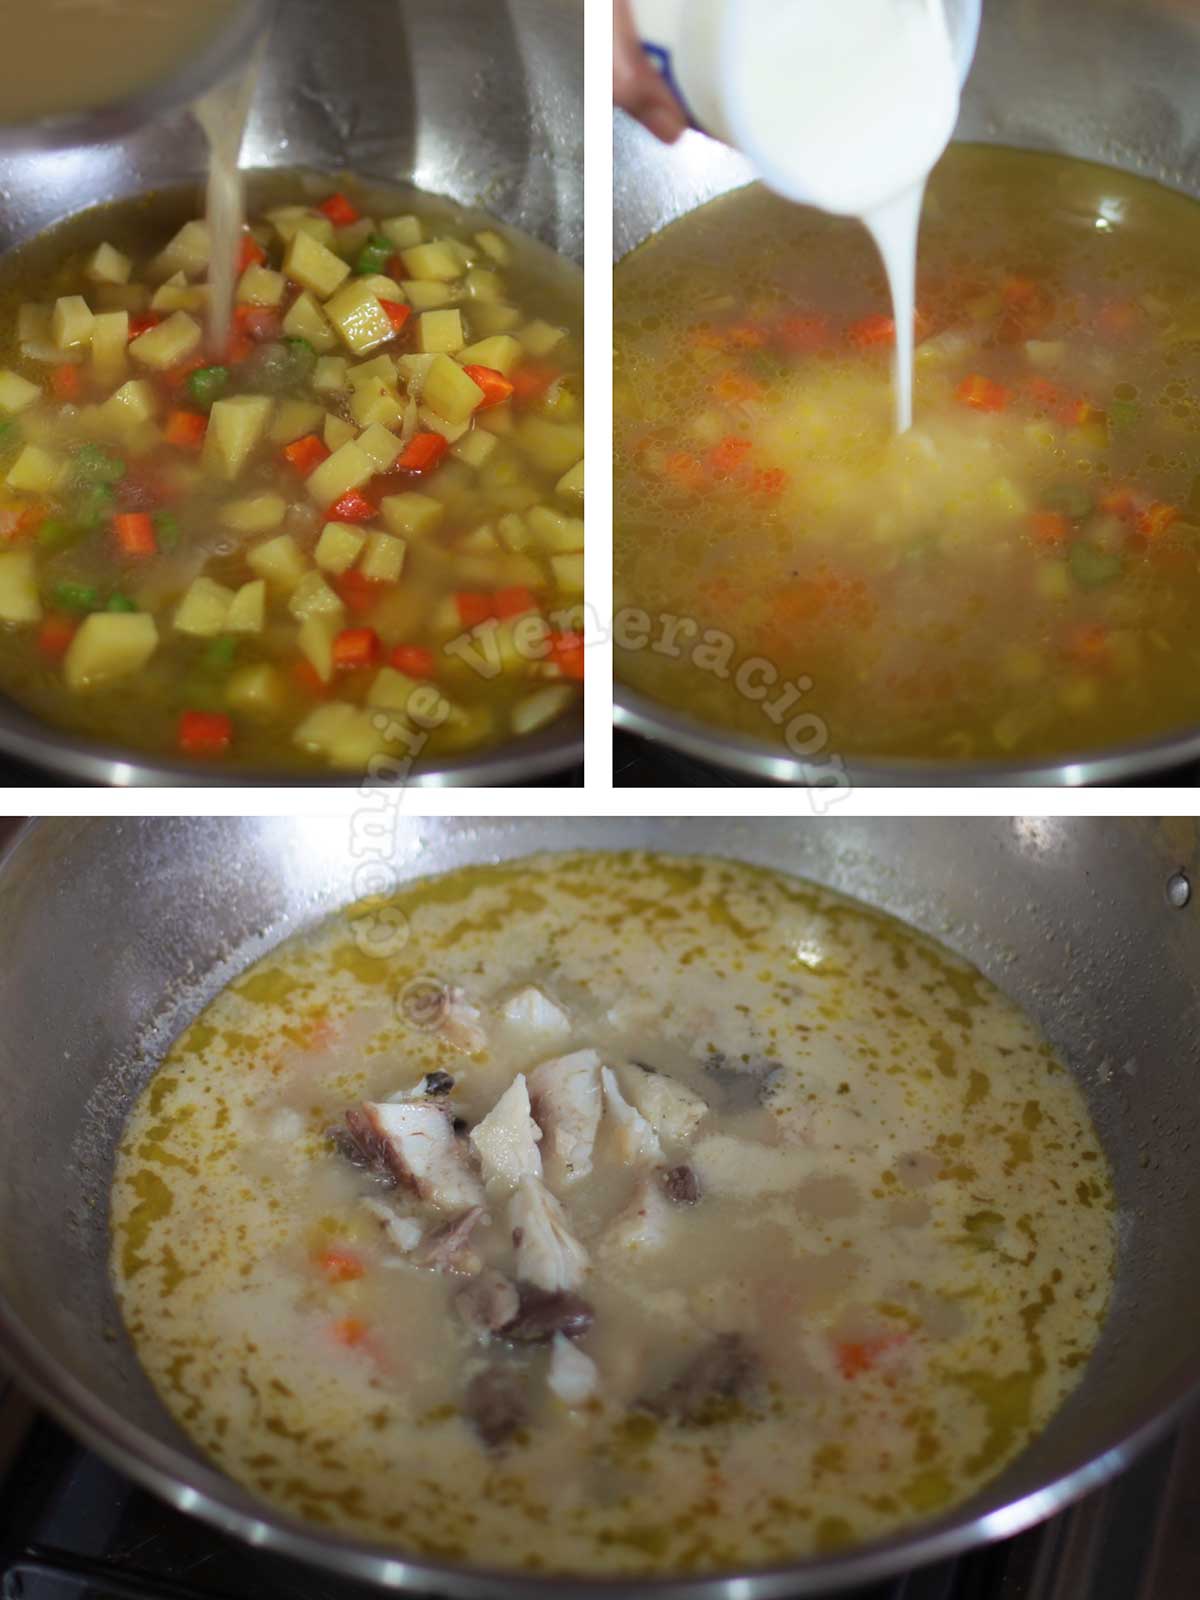 Pouring fish broth and yogurt into pan with vegetables before stirring in flaked fish